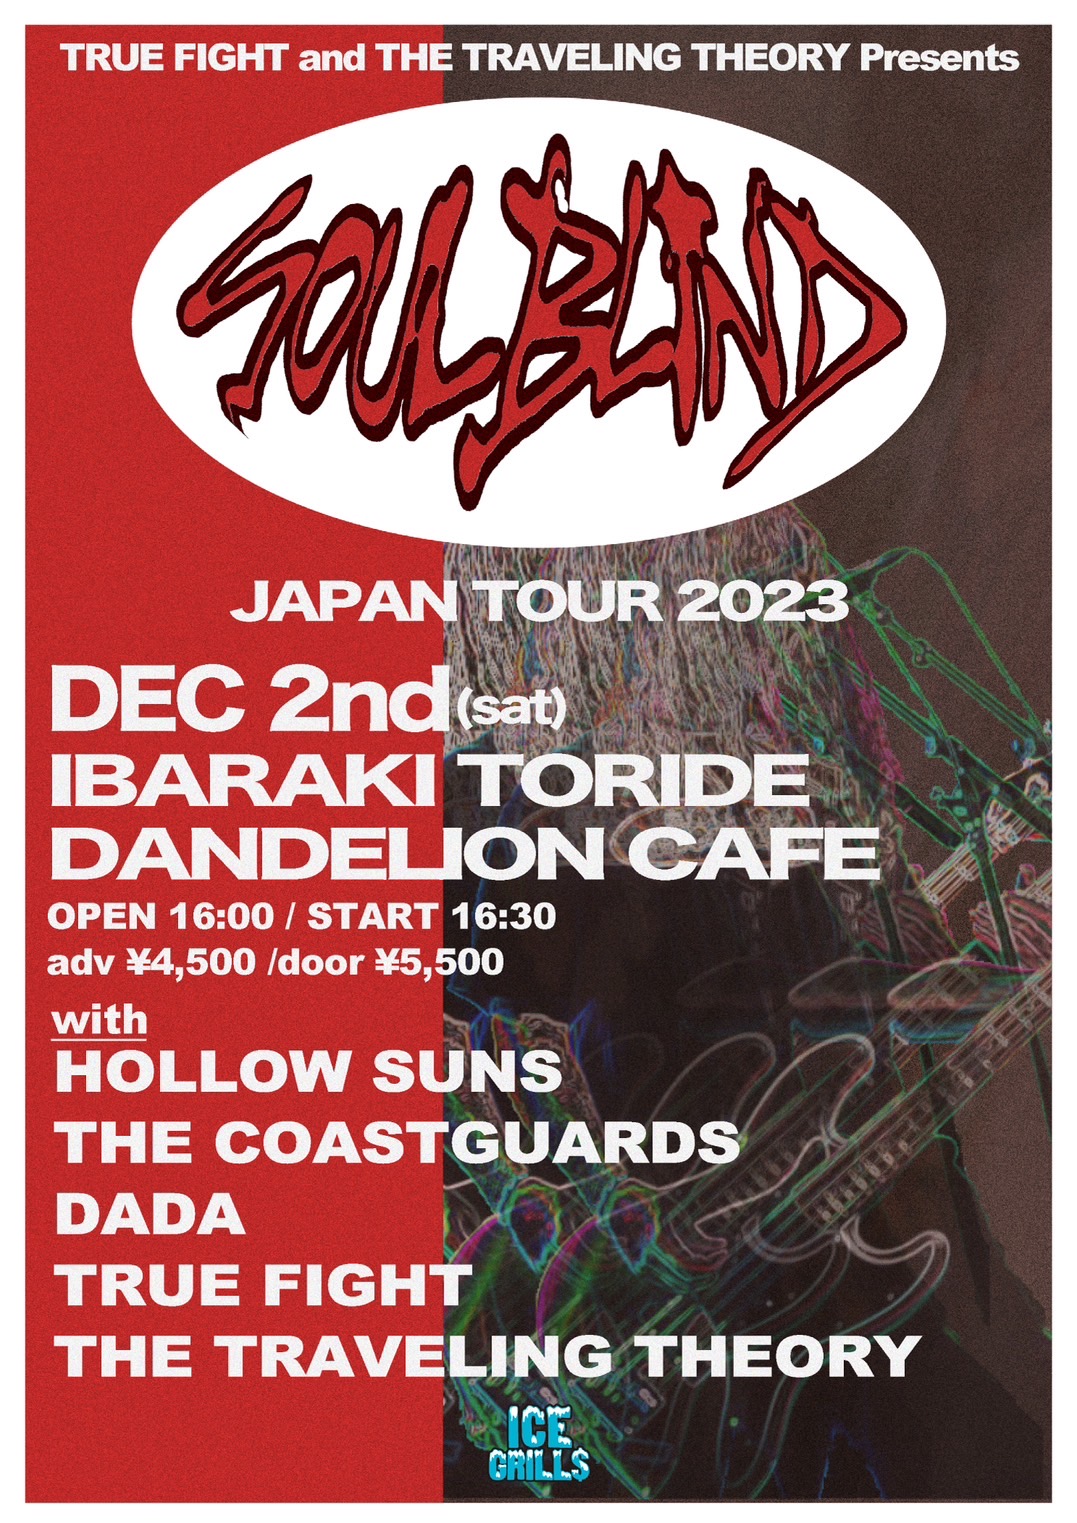 TRUE FIGHT＆The Traveling Theory presents 
ICE GRILLS TOUR SOUL BLIND JAPAN TOUR 2023